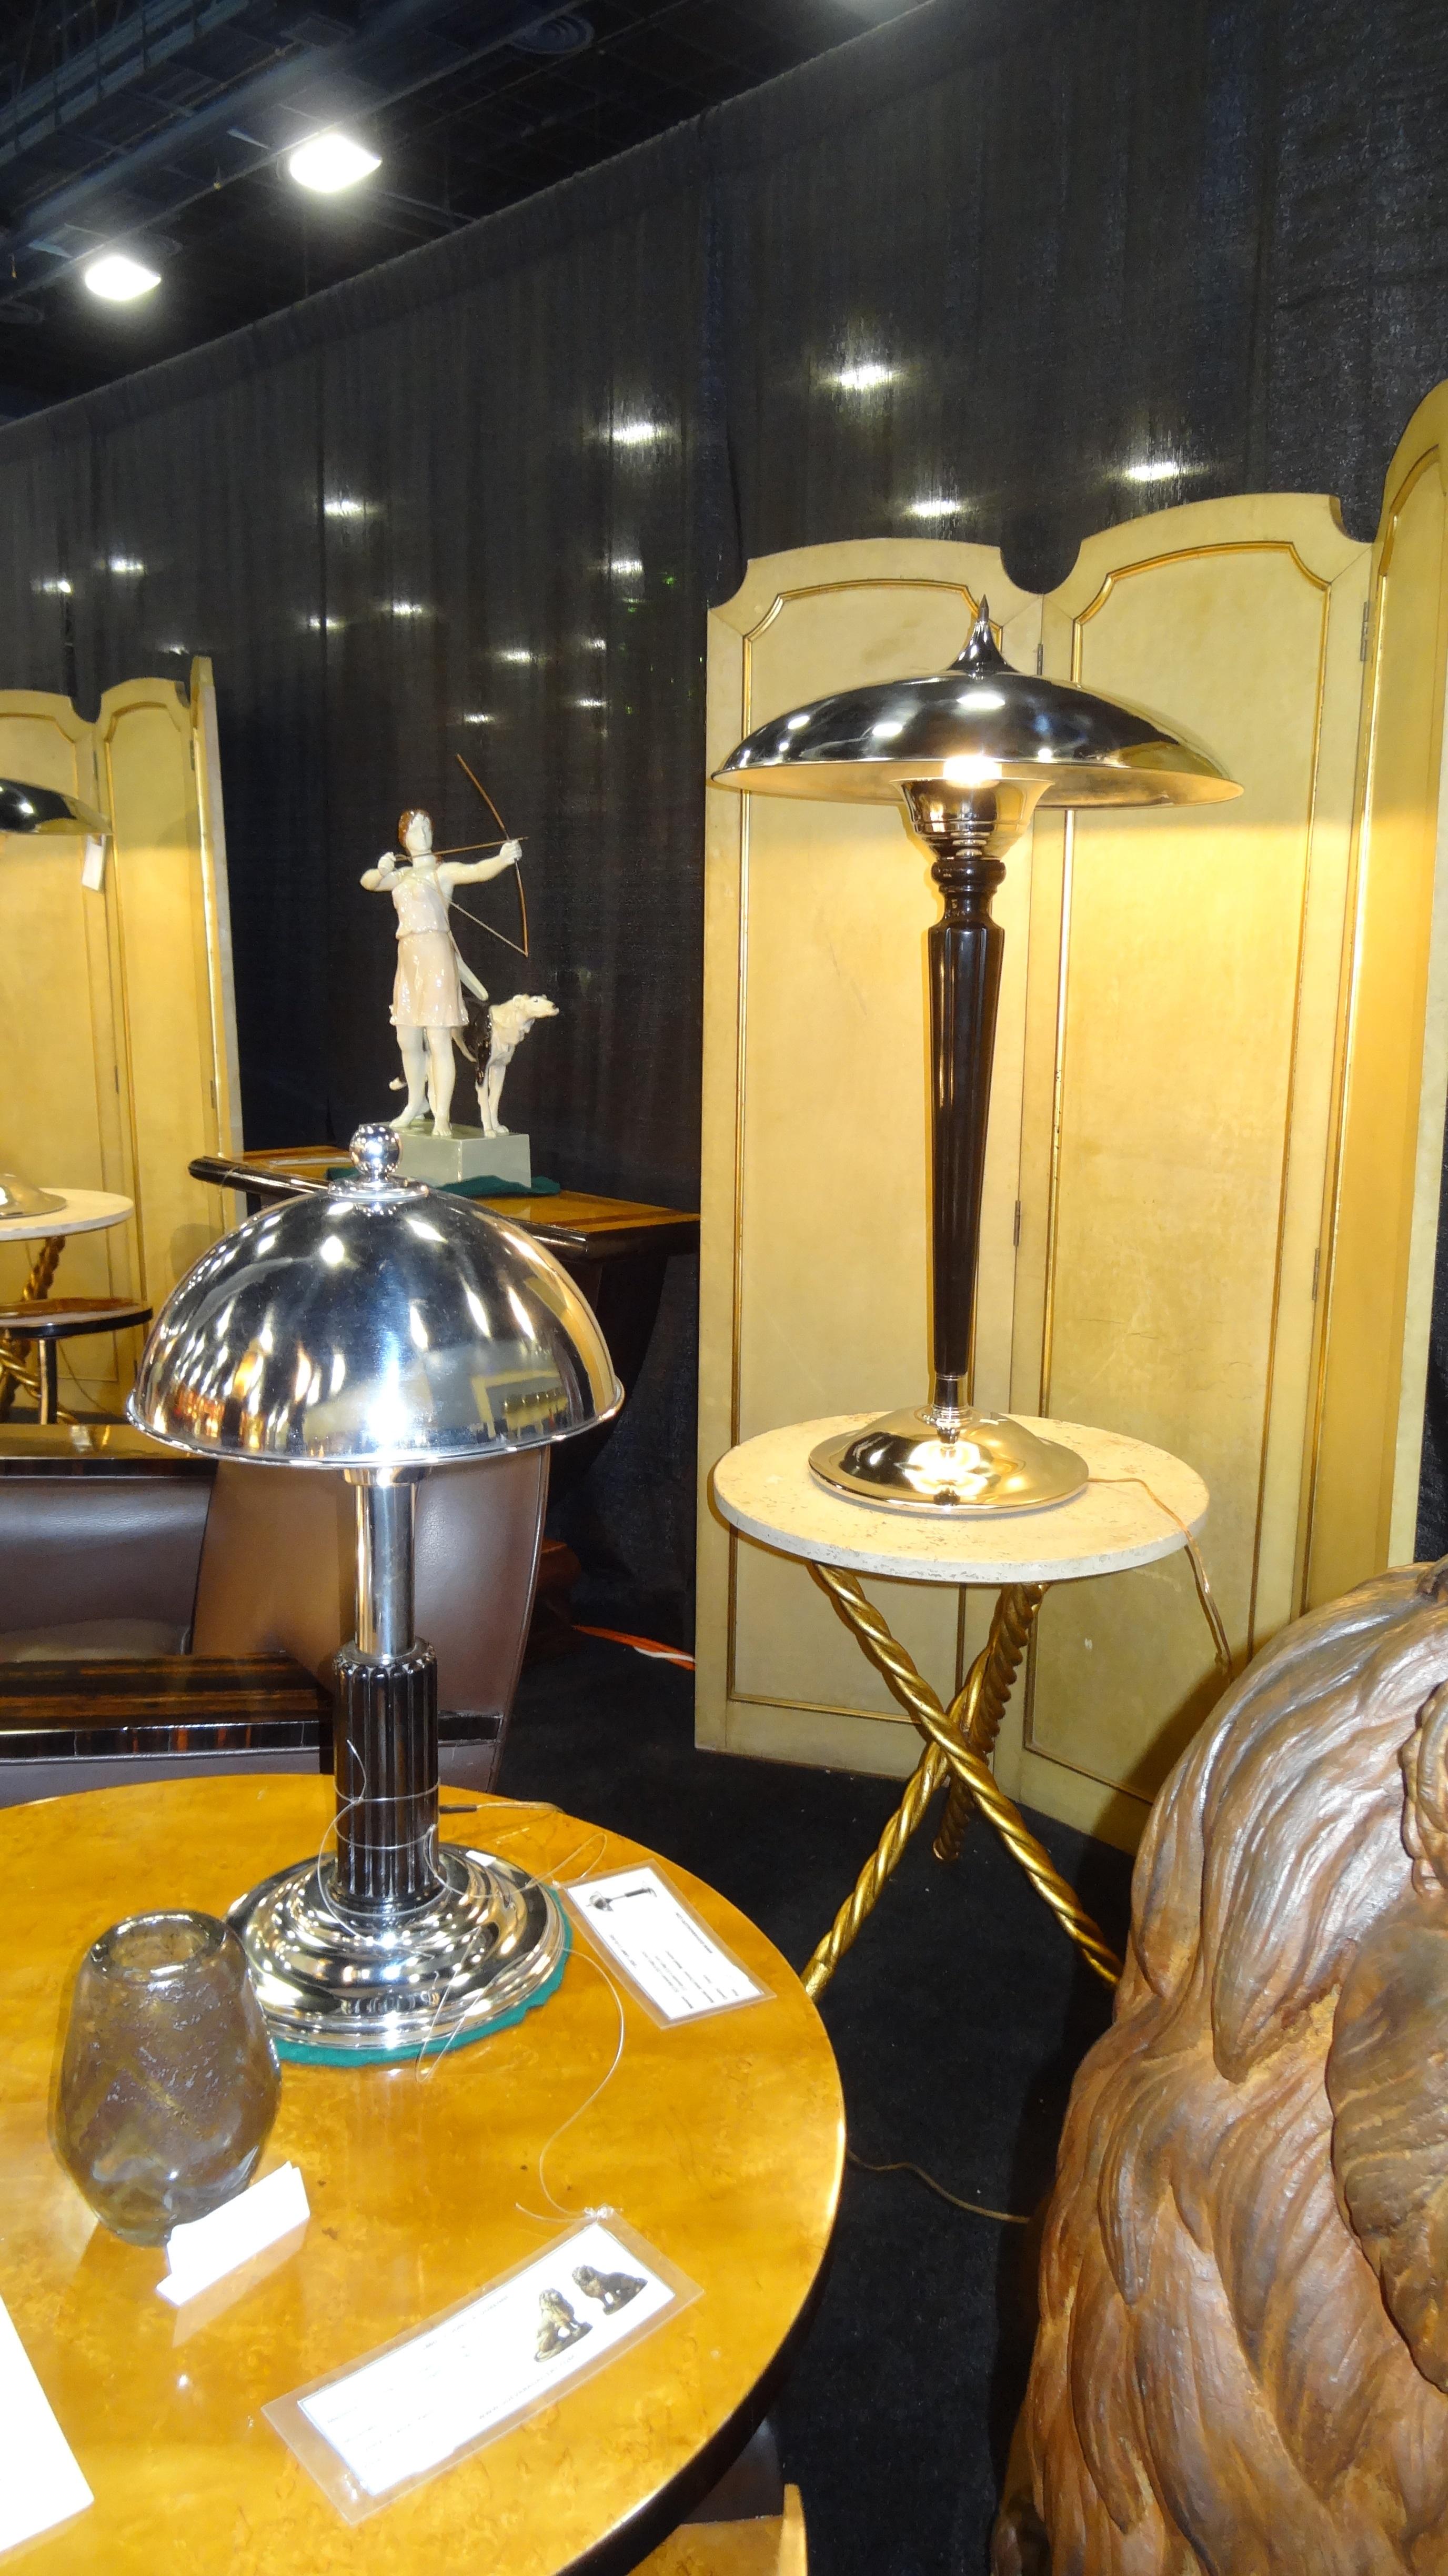 Table lamps Art deco.
Exhibited at Original antique show ( Miami beach ) and Palm beach 